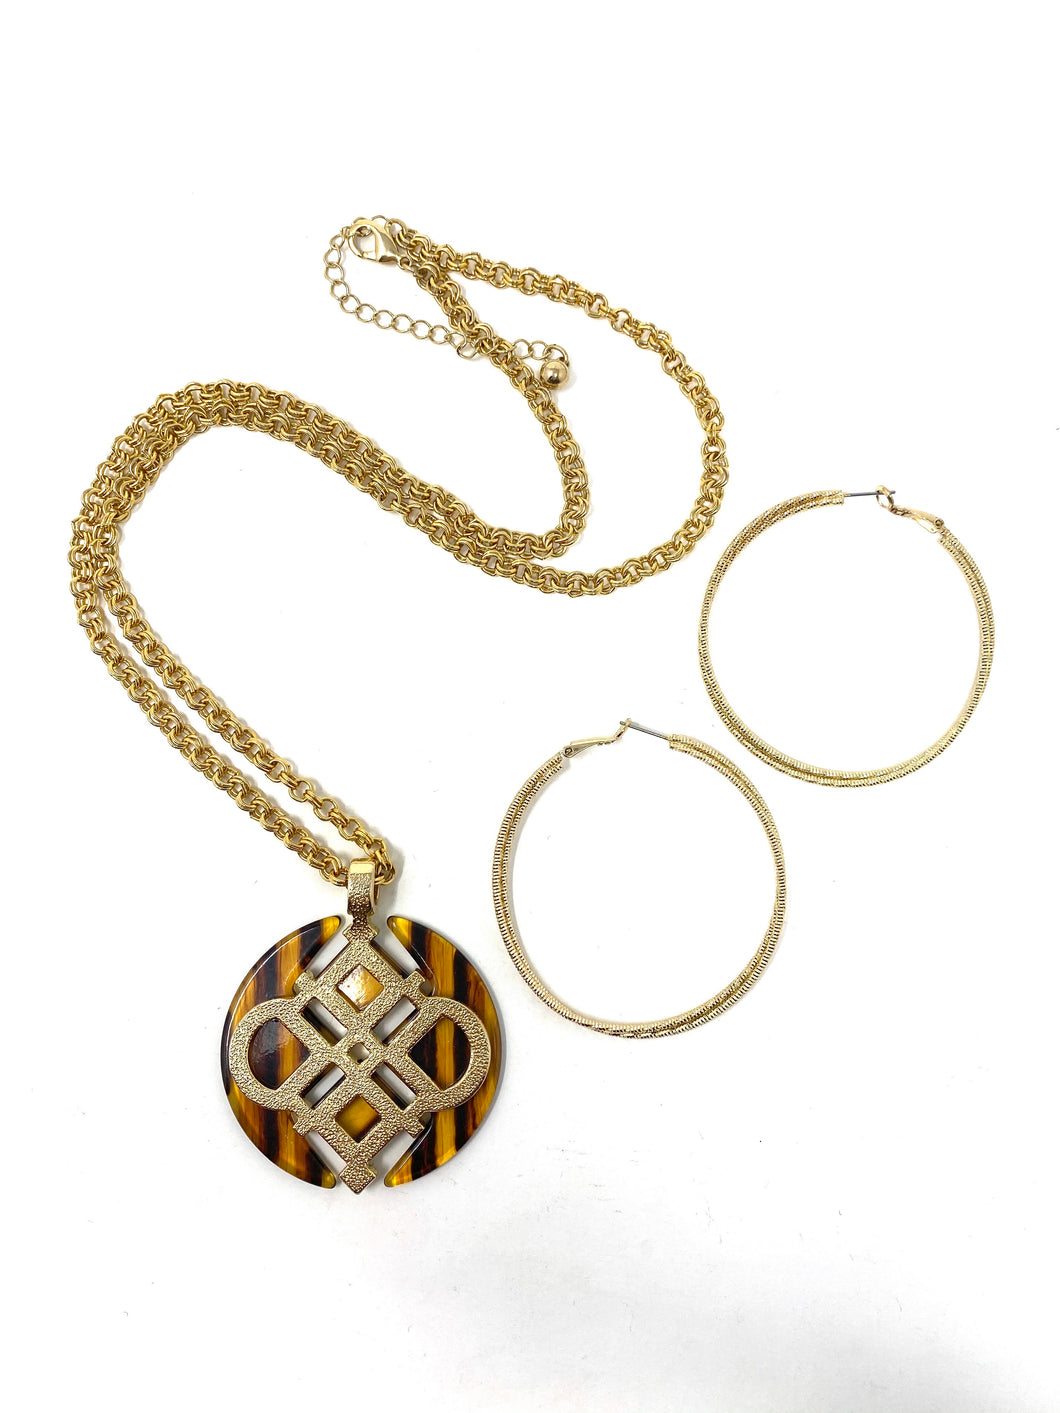 Tortoise Shell and Gold Design Necklace and Hoop Earring Set